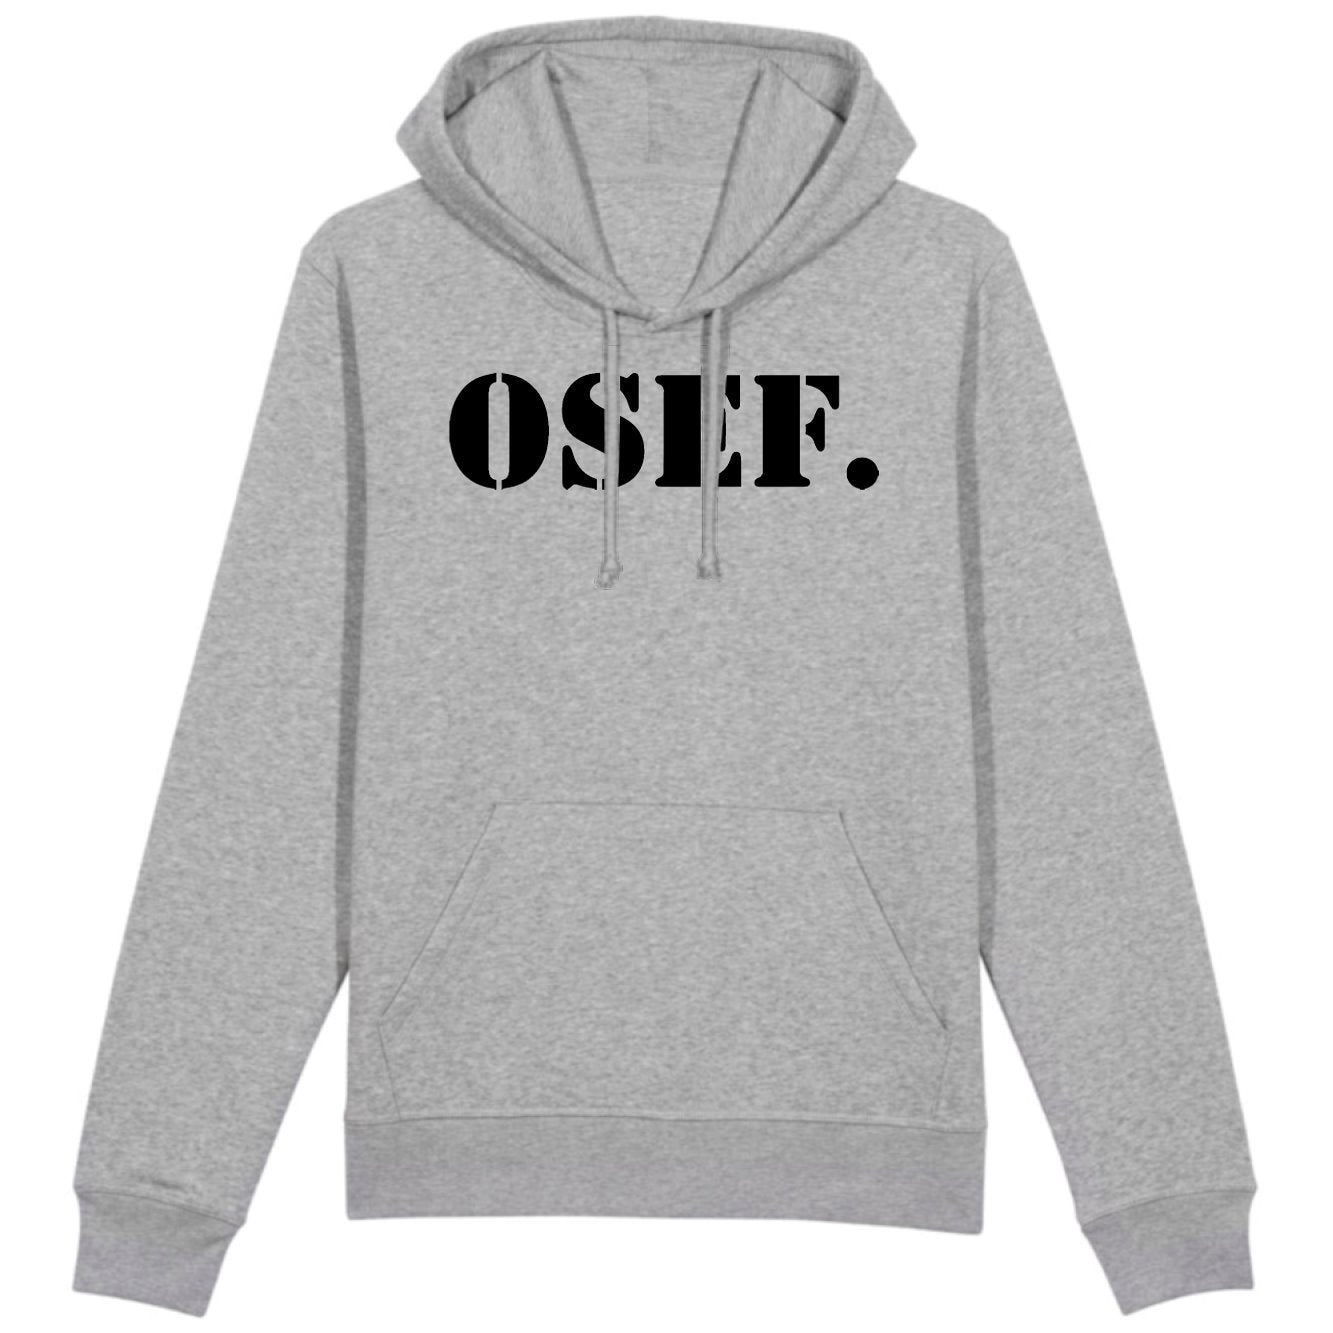 Sweat Capuche Adulte OSEF On s'en fout 